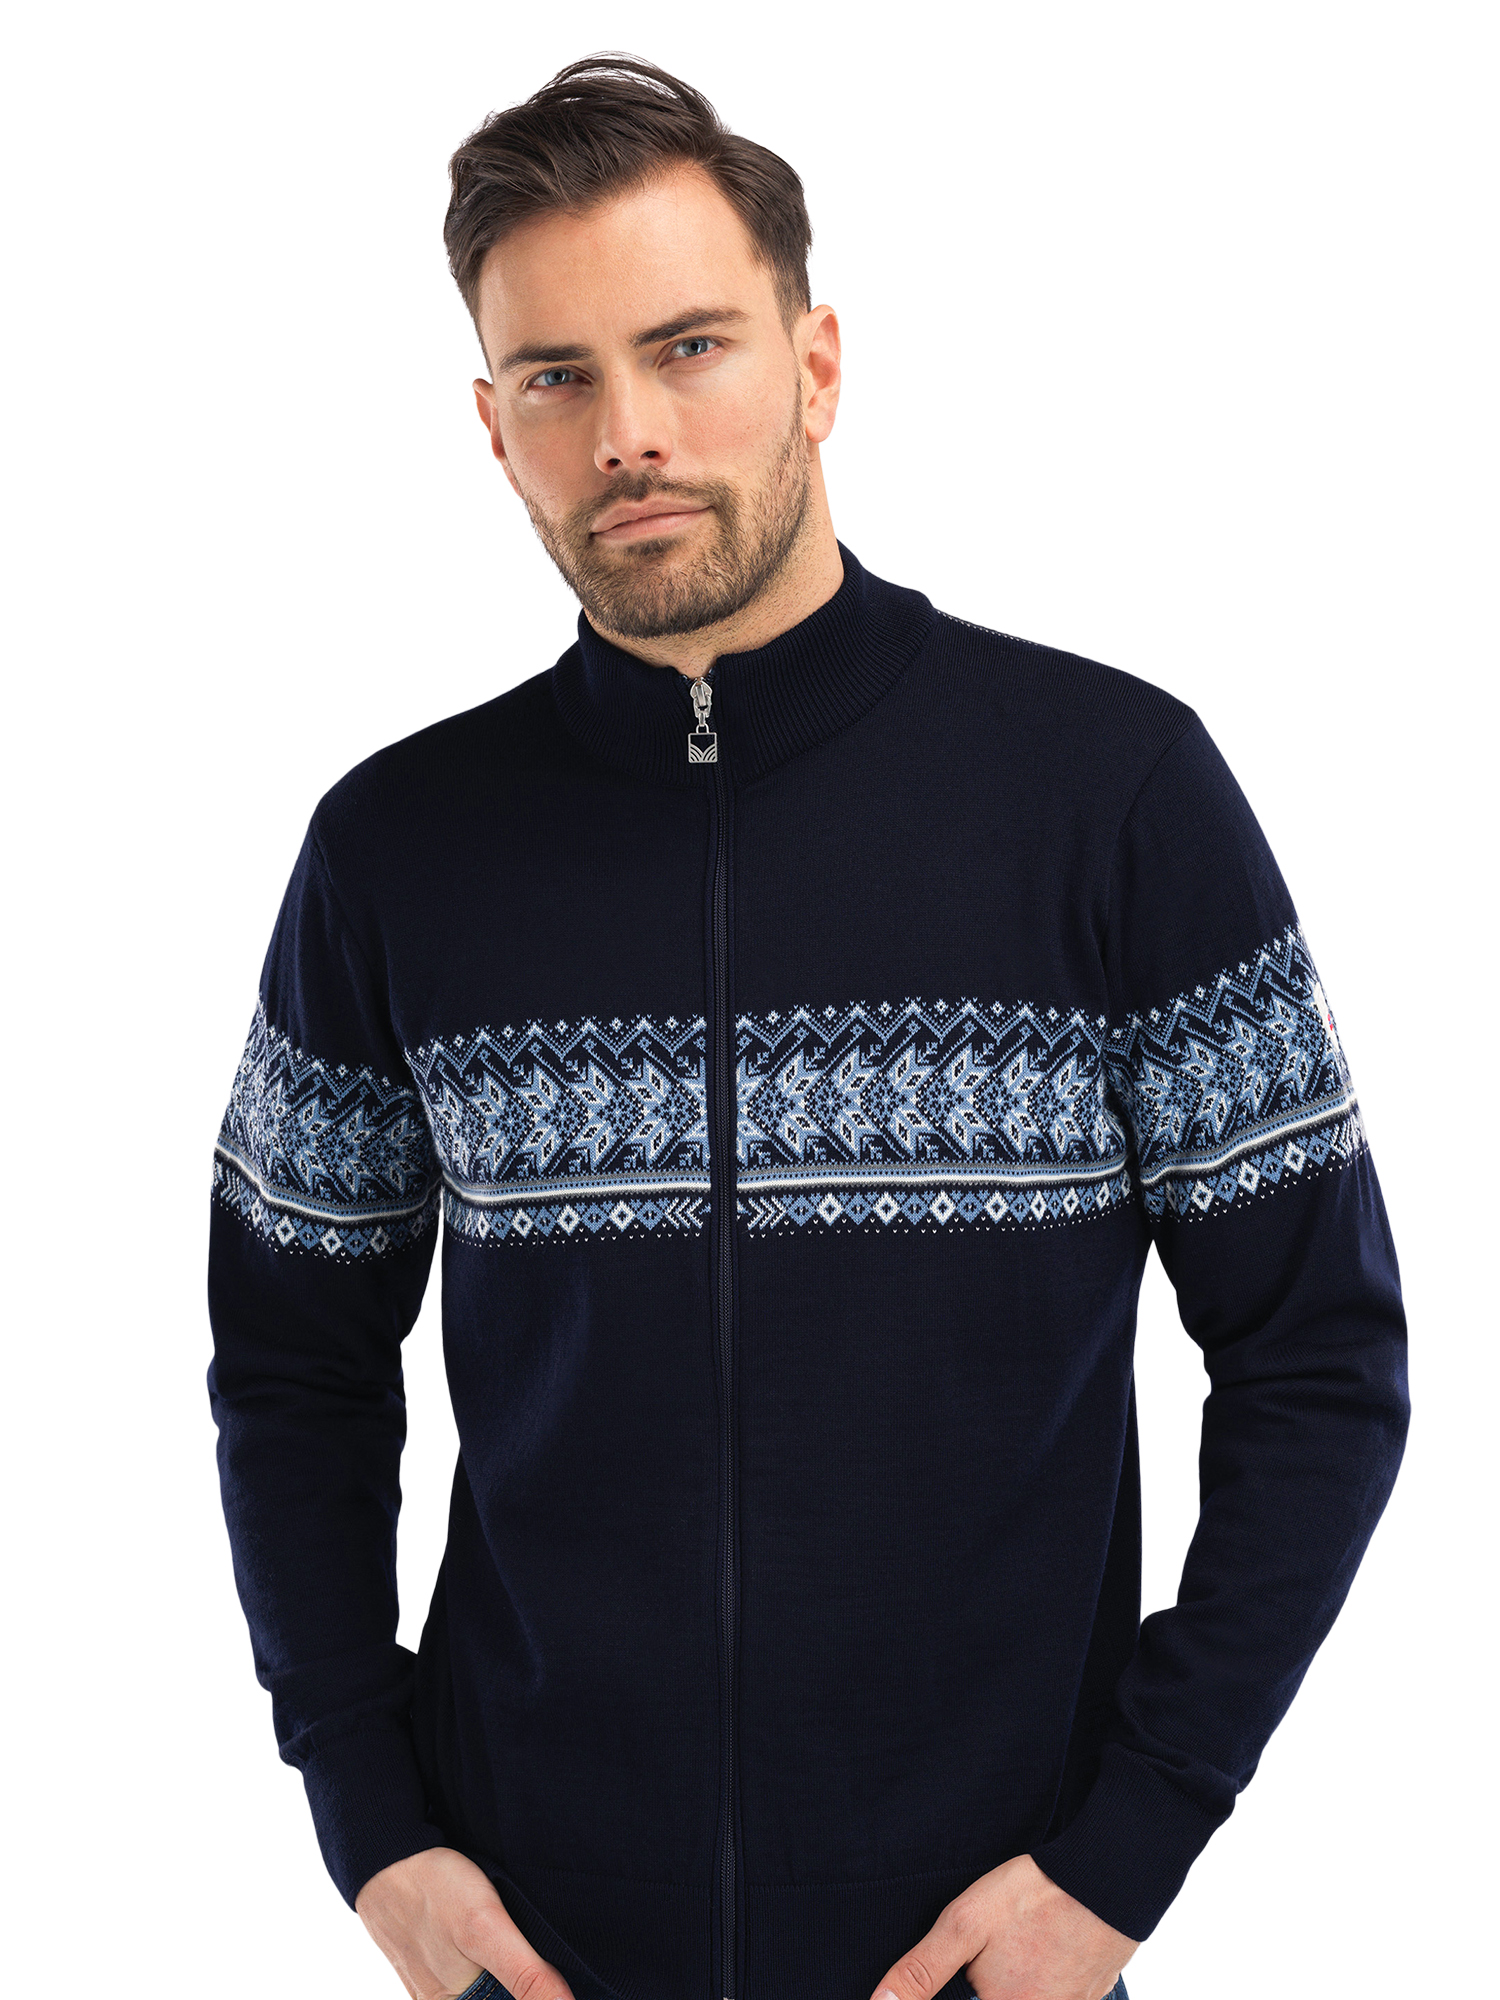 Wool and knit jackets for men - Dale of Norway